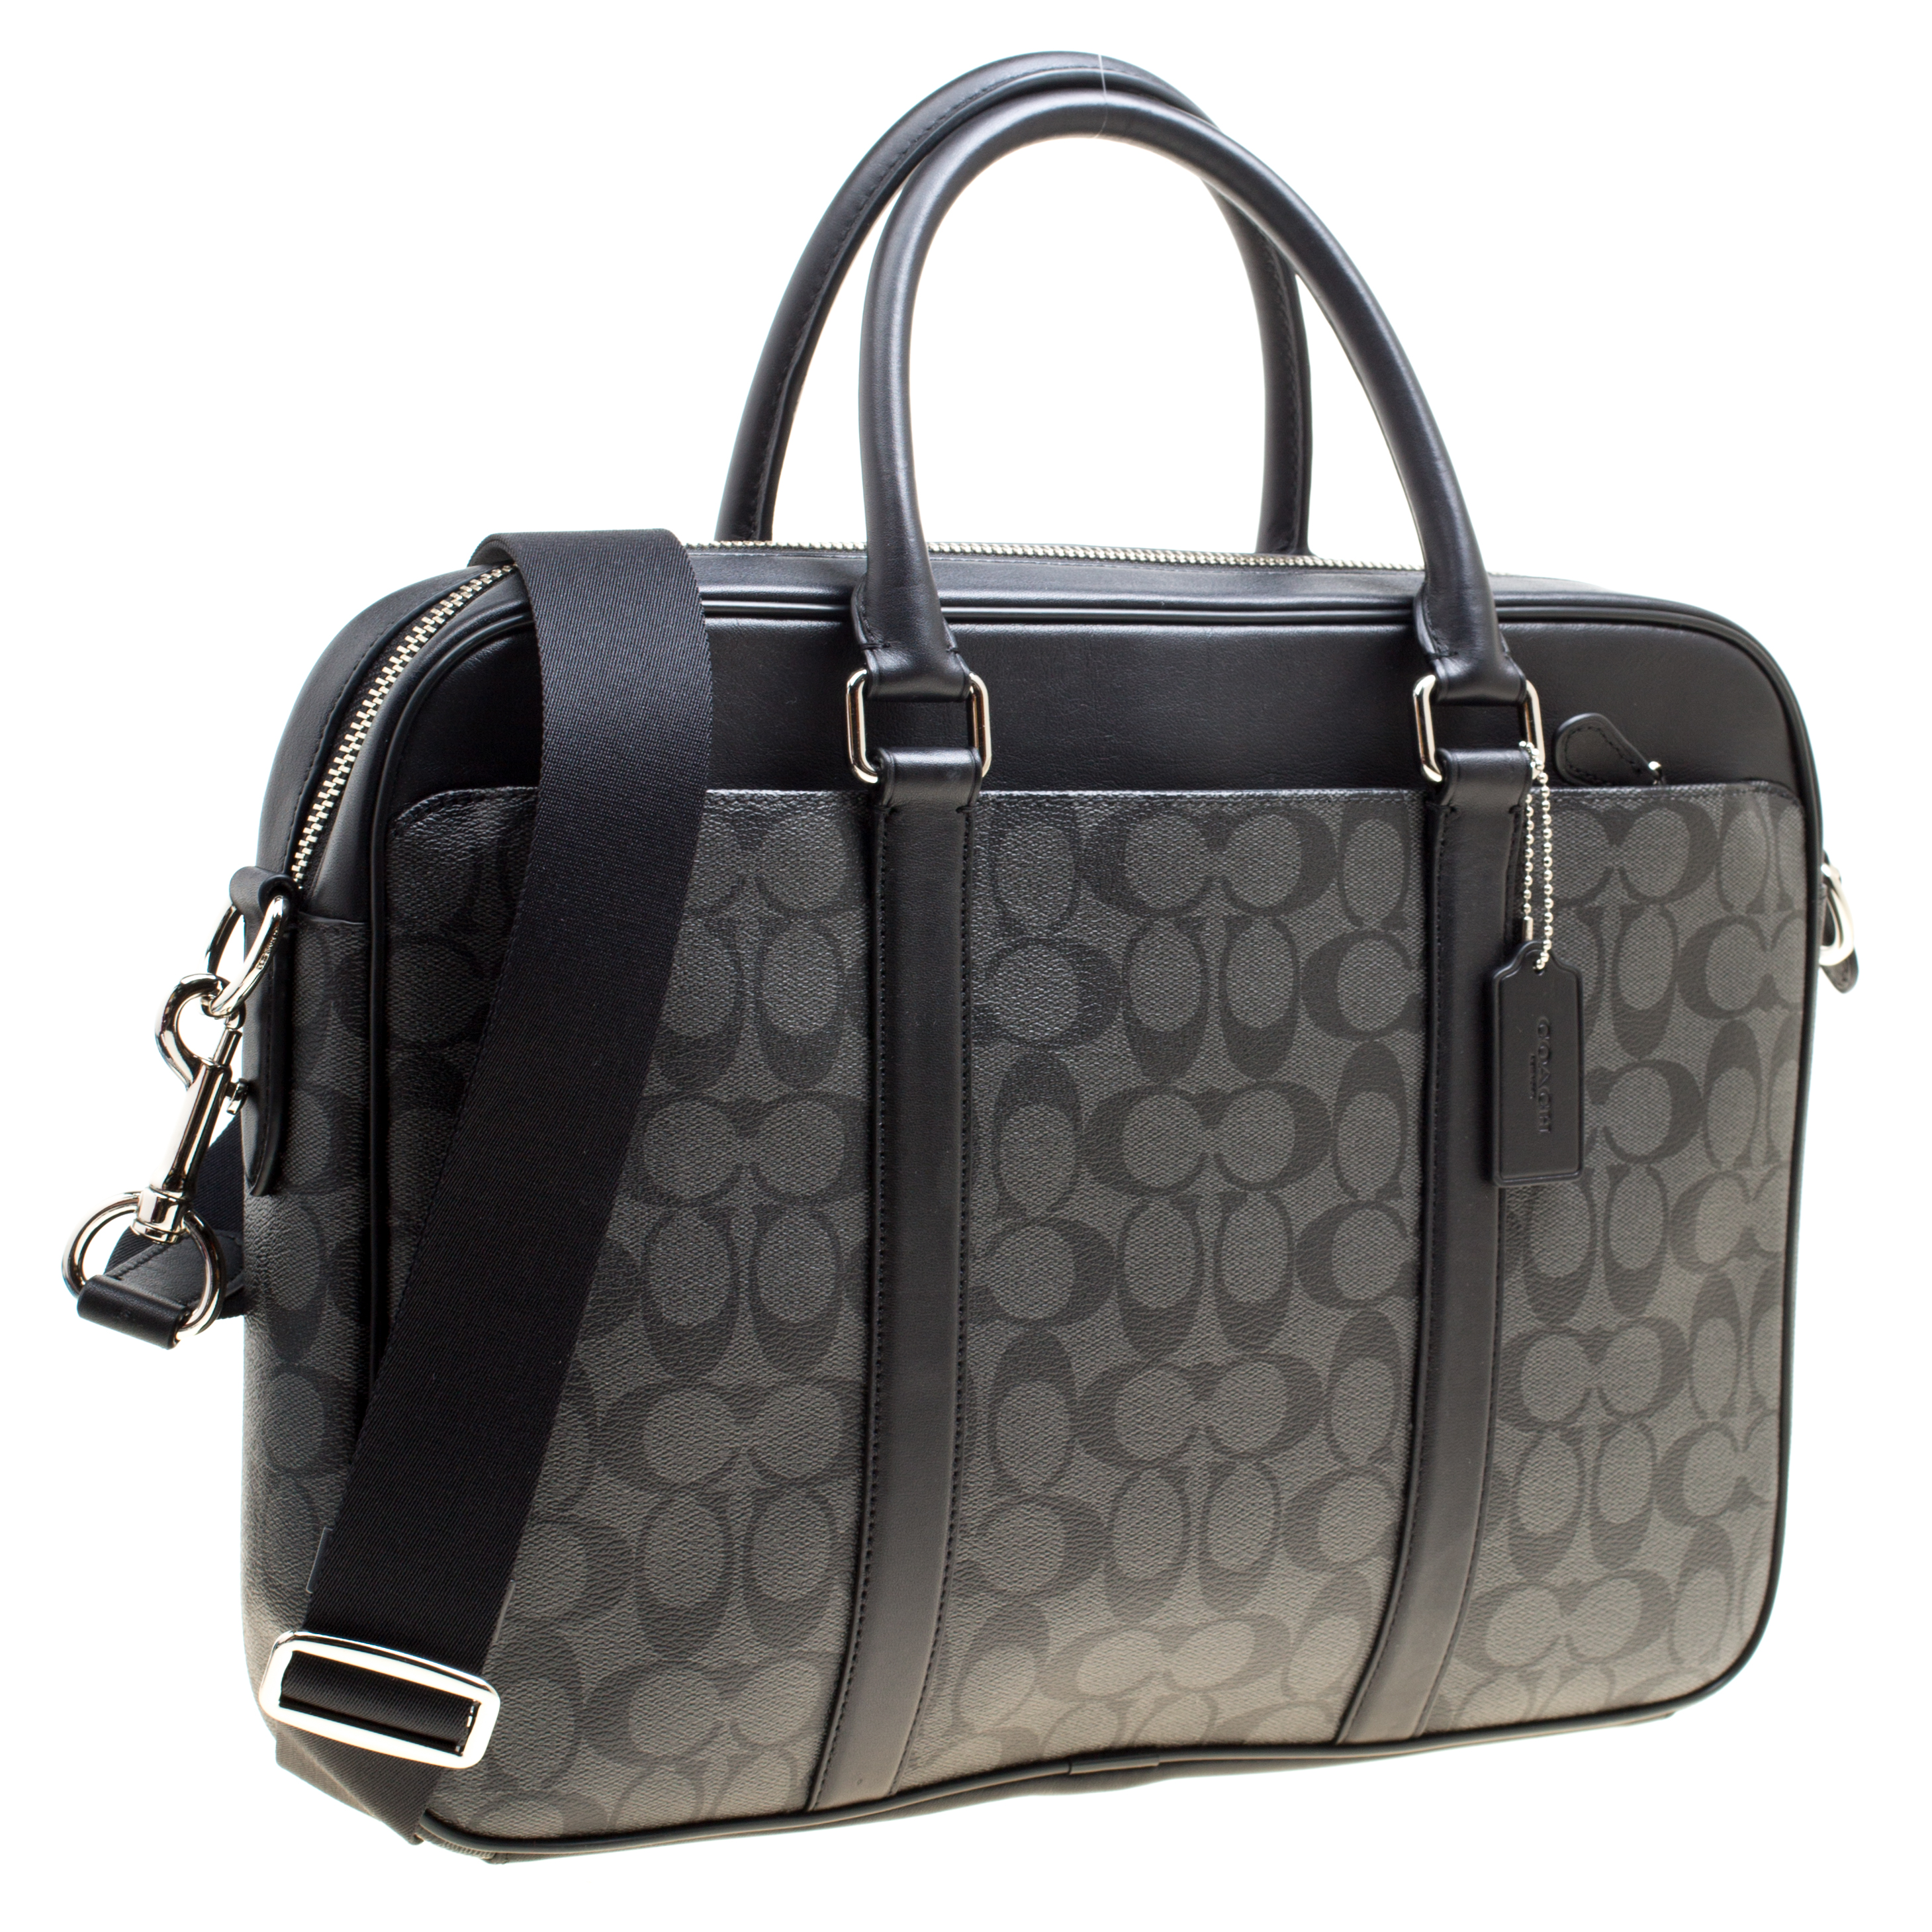 Details more than 72 coach laptop bags best - in.duhocakina